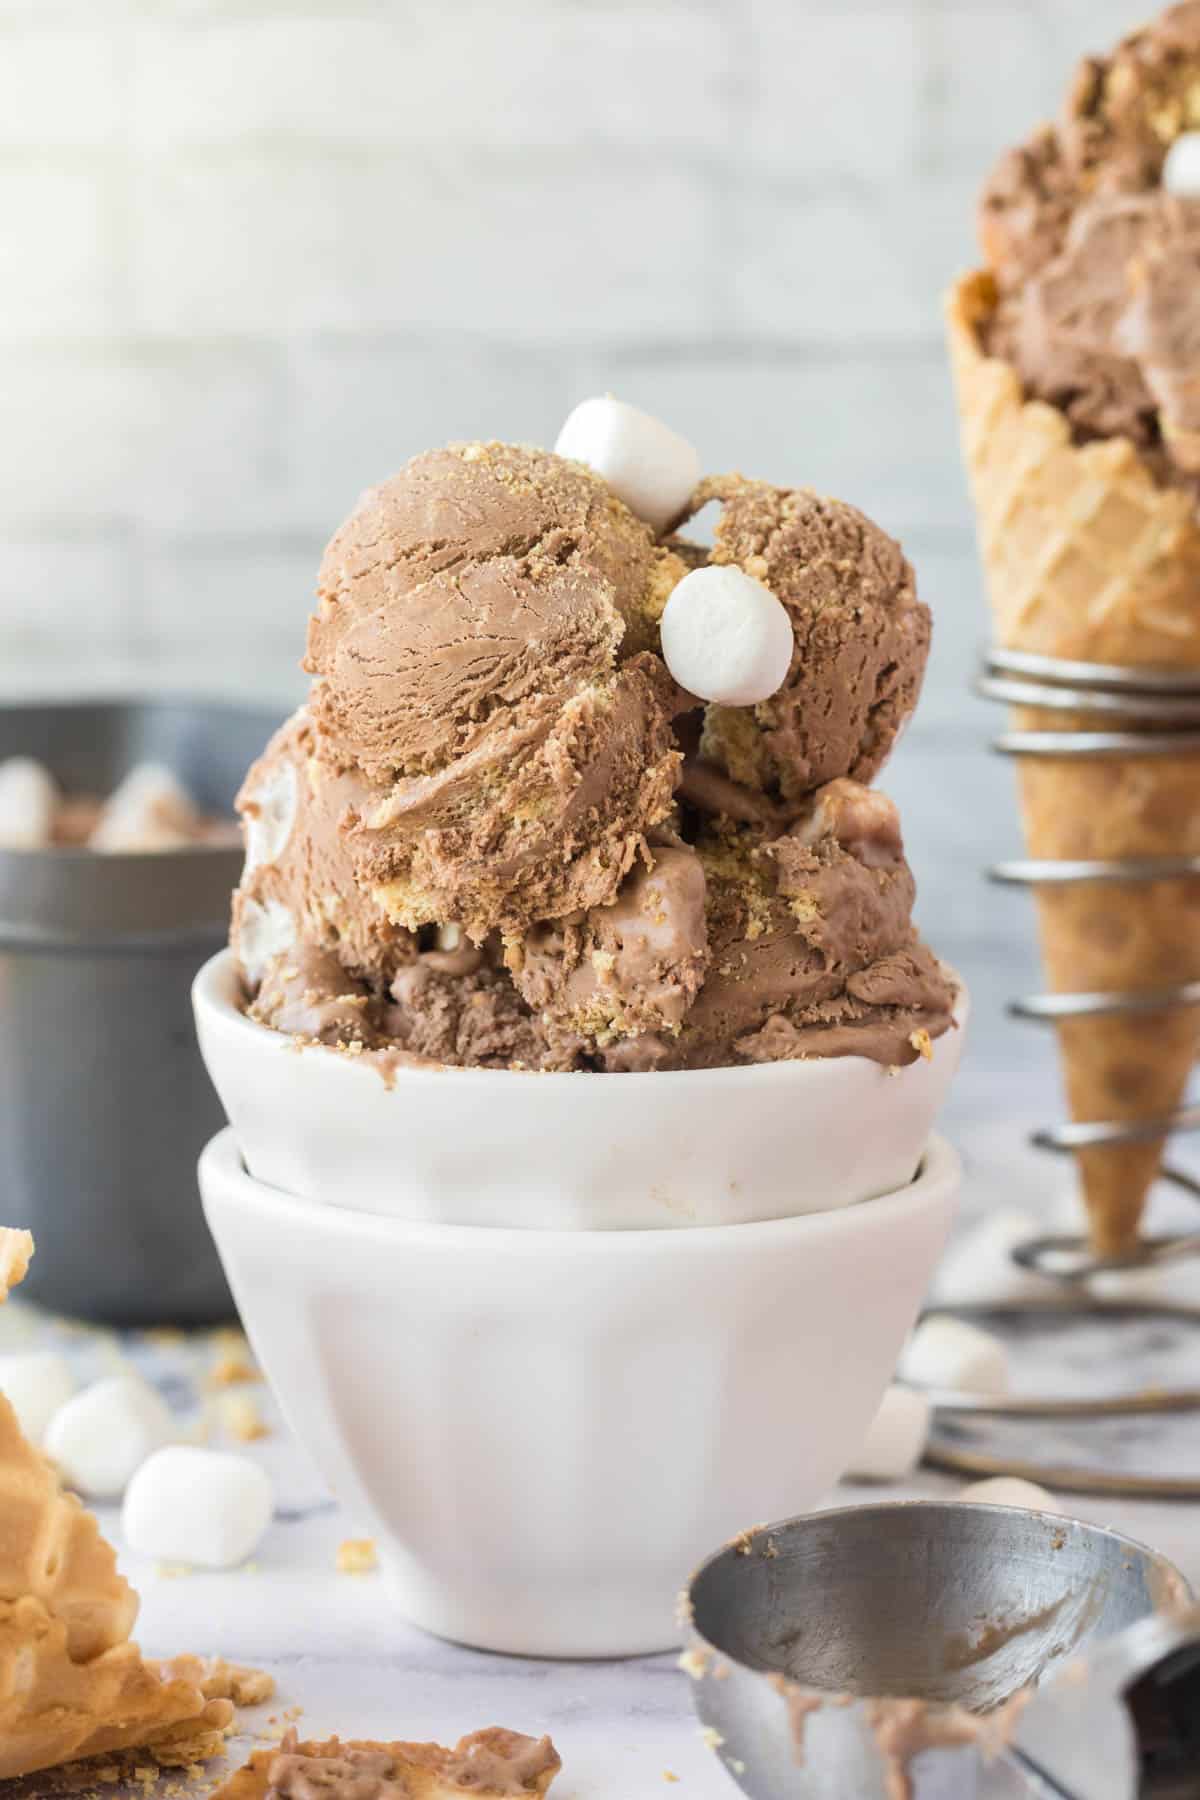 S'mores Ice cream in a white dish with some of the ice cream in a waffle cone in the background.